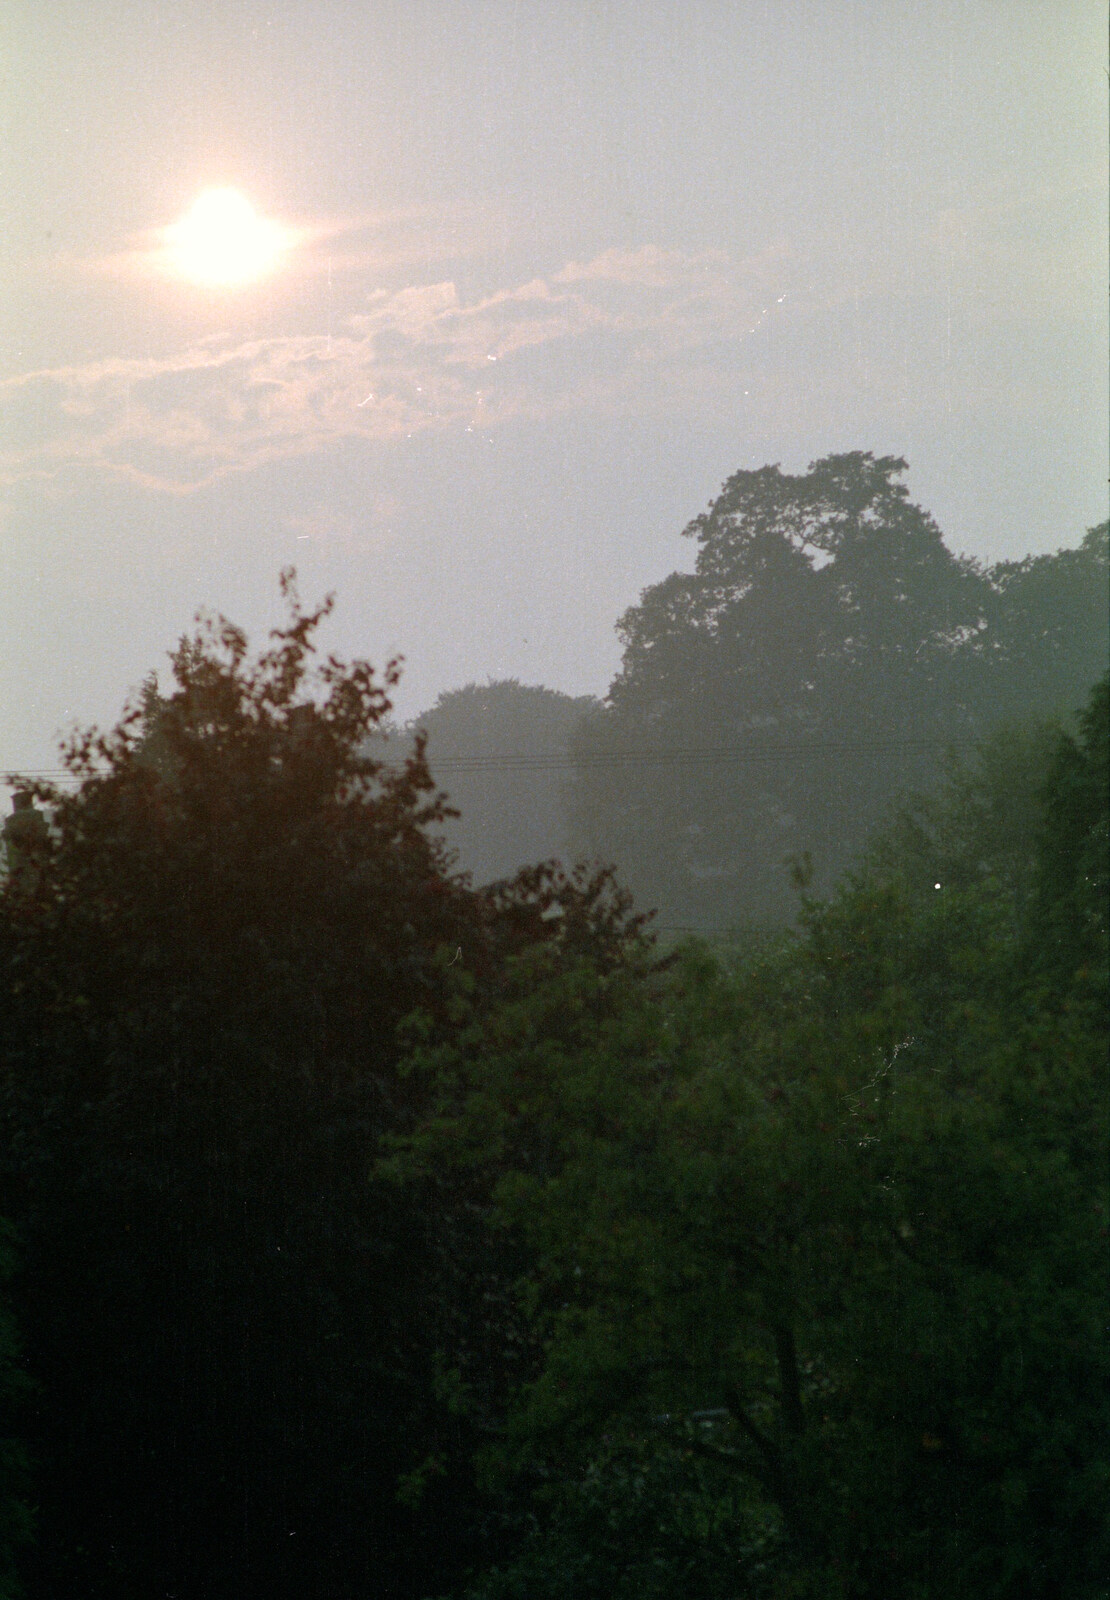 Misty trees somewhere from McCarthy and Stone and the Bournemouth Carnival, Dorset - 8th August 1986